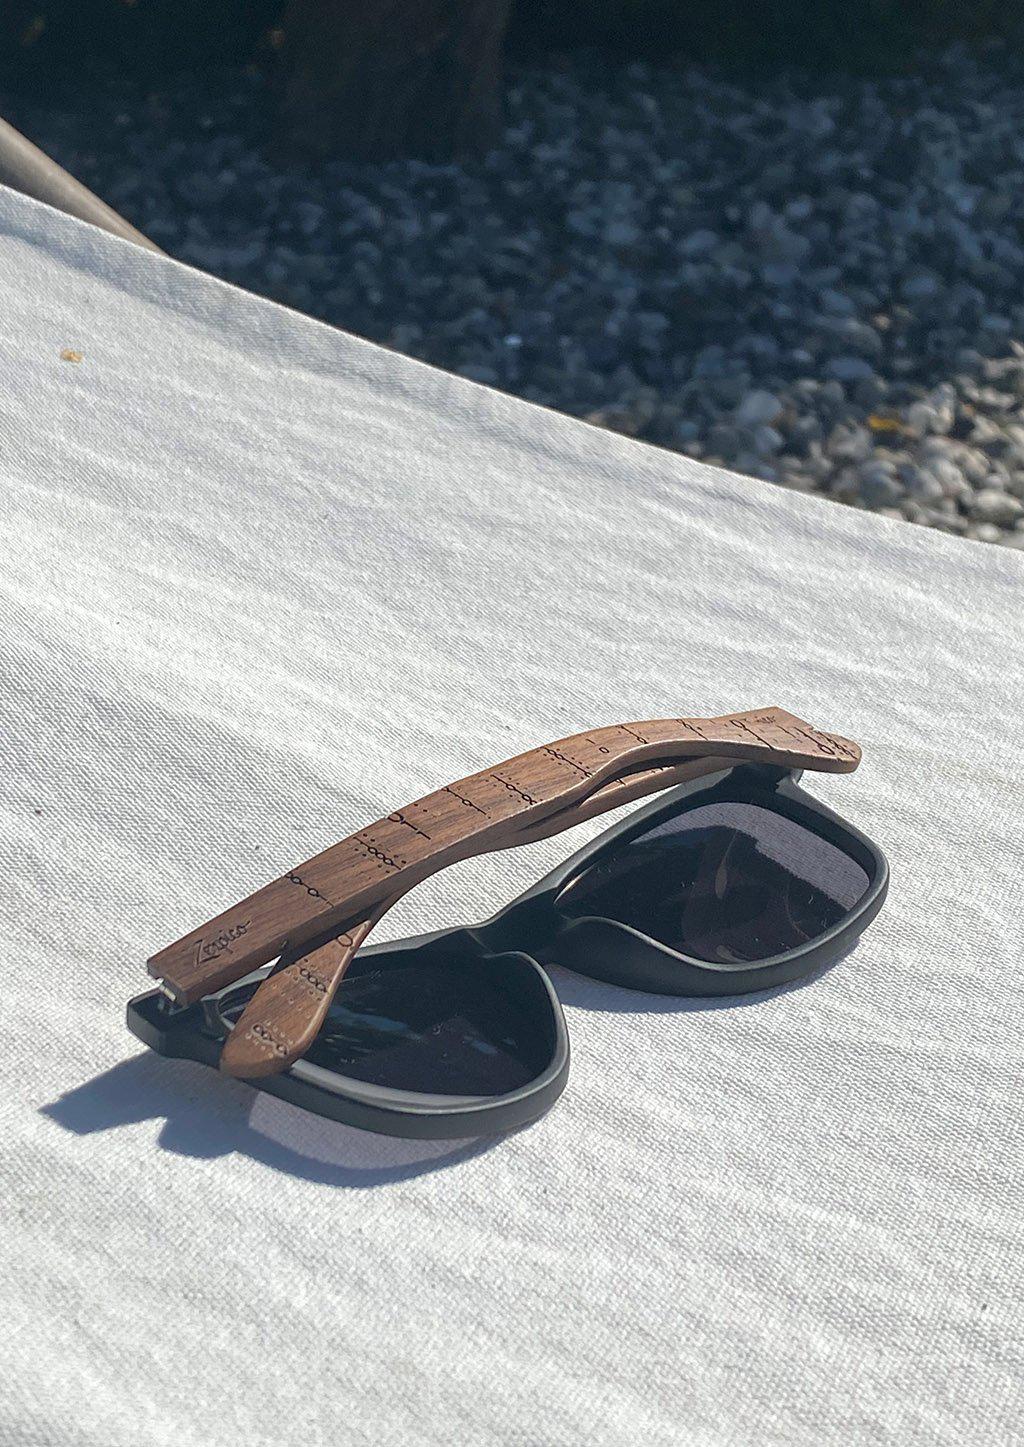 Engraved wooden sunglasses Inspired by the computers and the programing languages. Summer vibes.